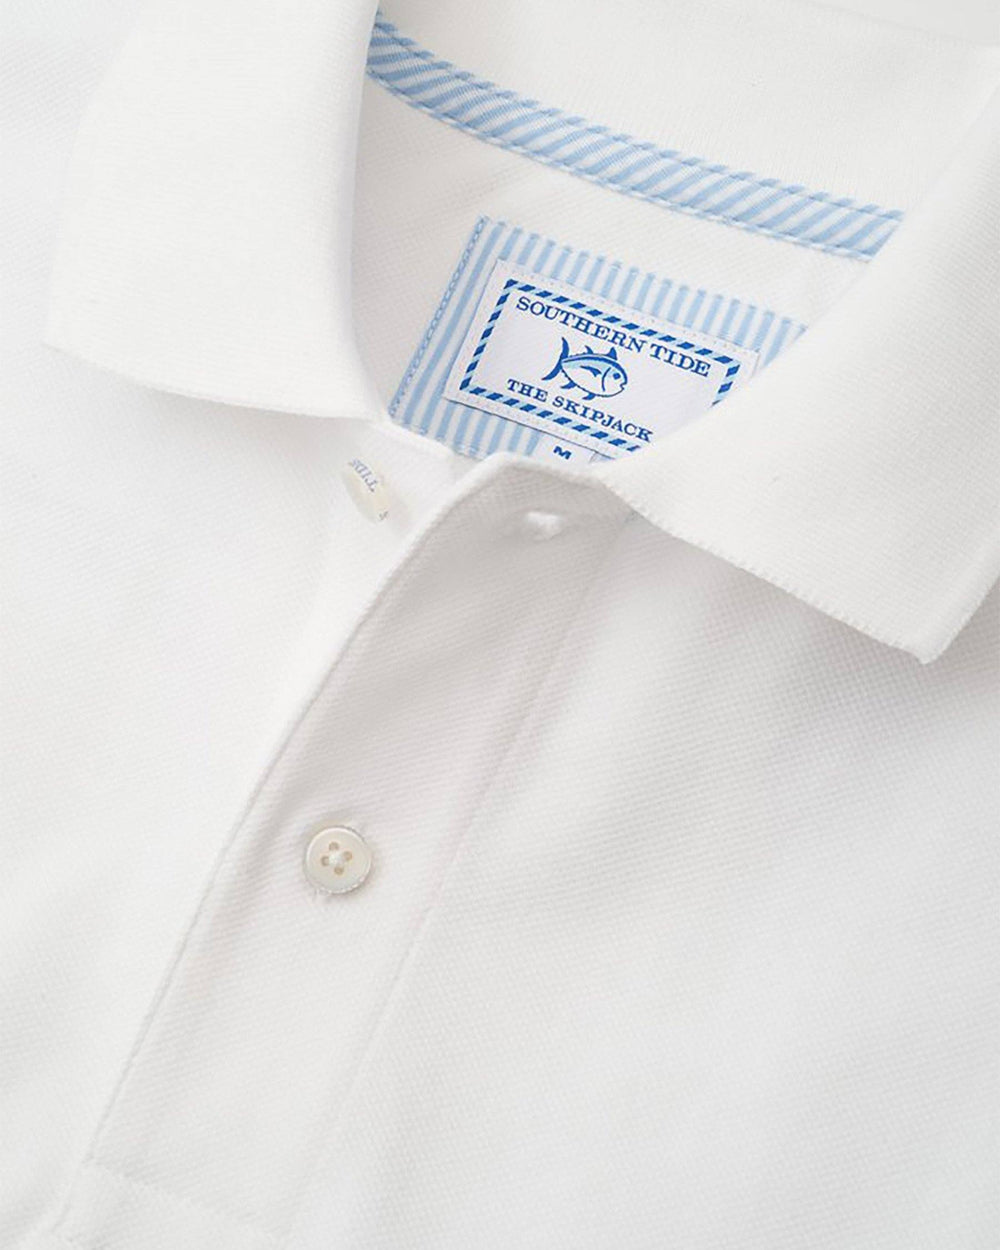 The detail of the Men's White Coastal Carolina Pique Polo Shirt by Southern Tide - Classic White